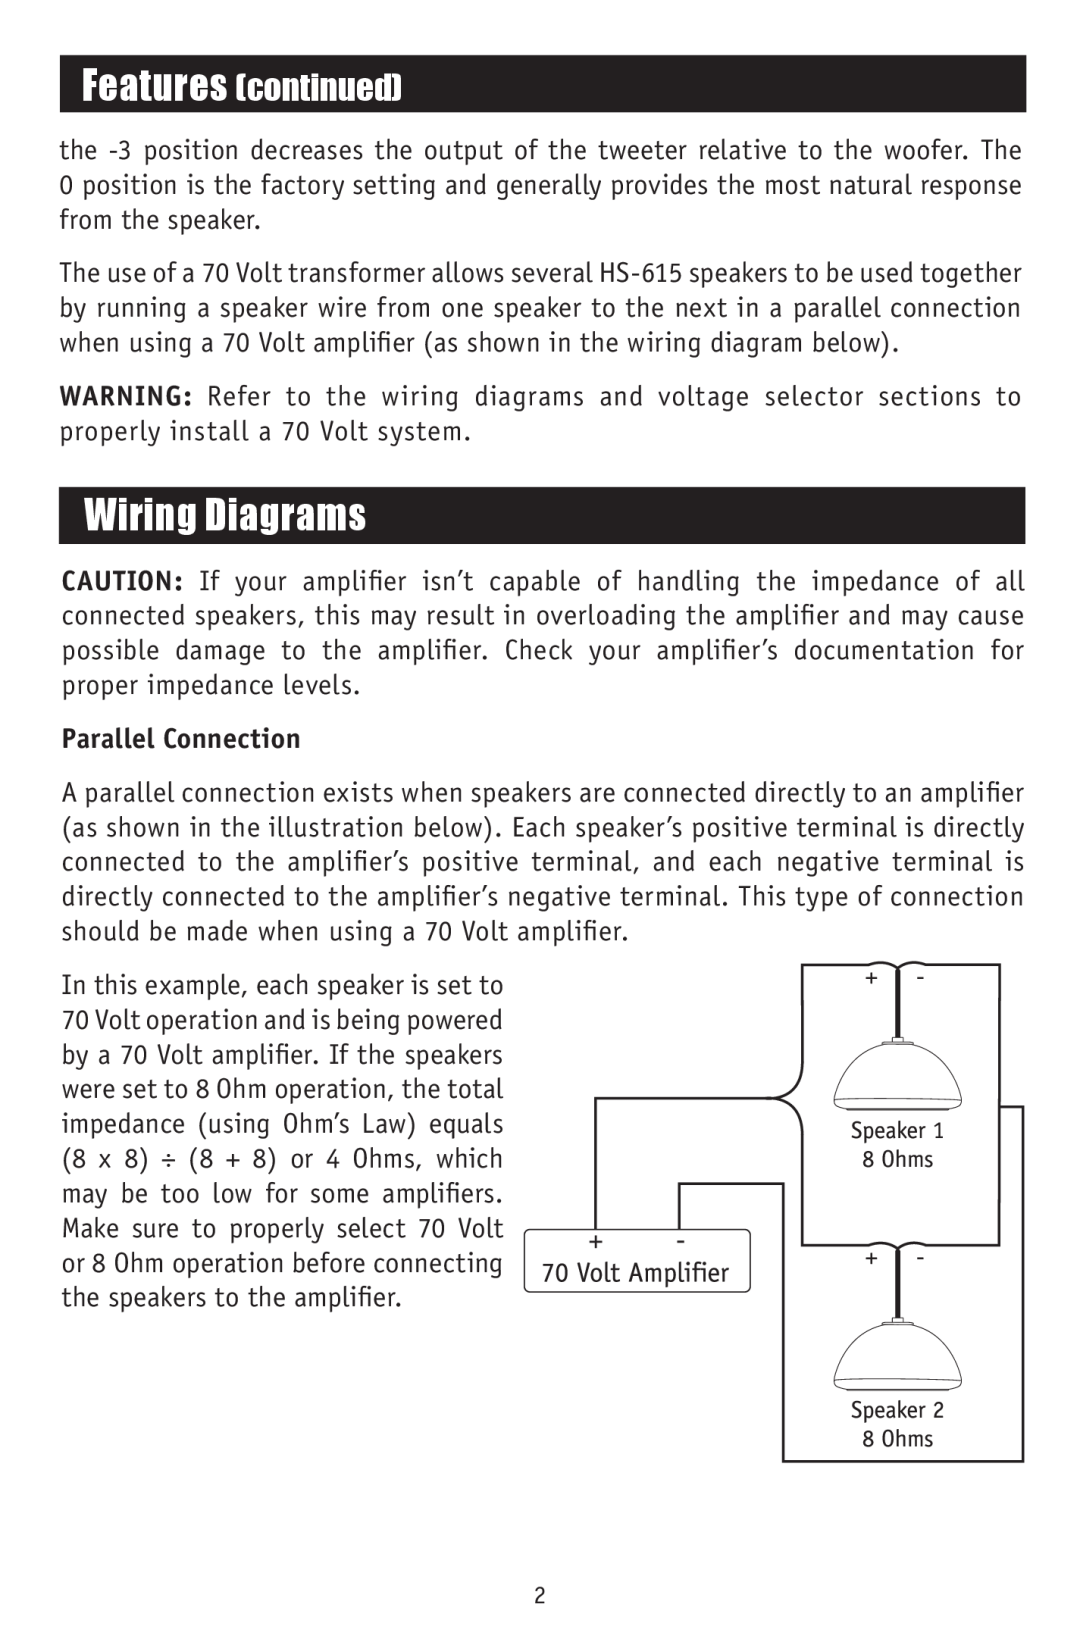 RBH Sound HS-615 owner manual Wiring Diagrams, Features continued 